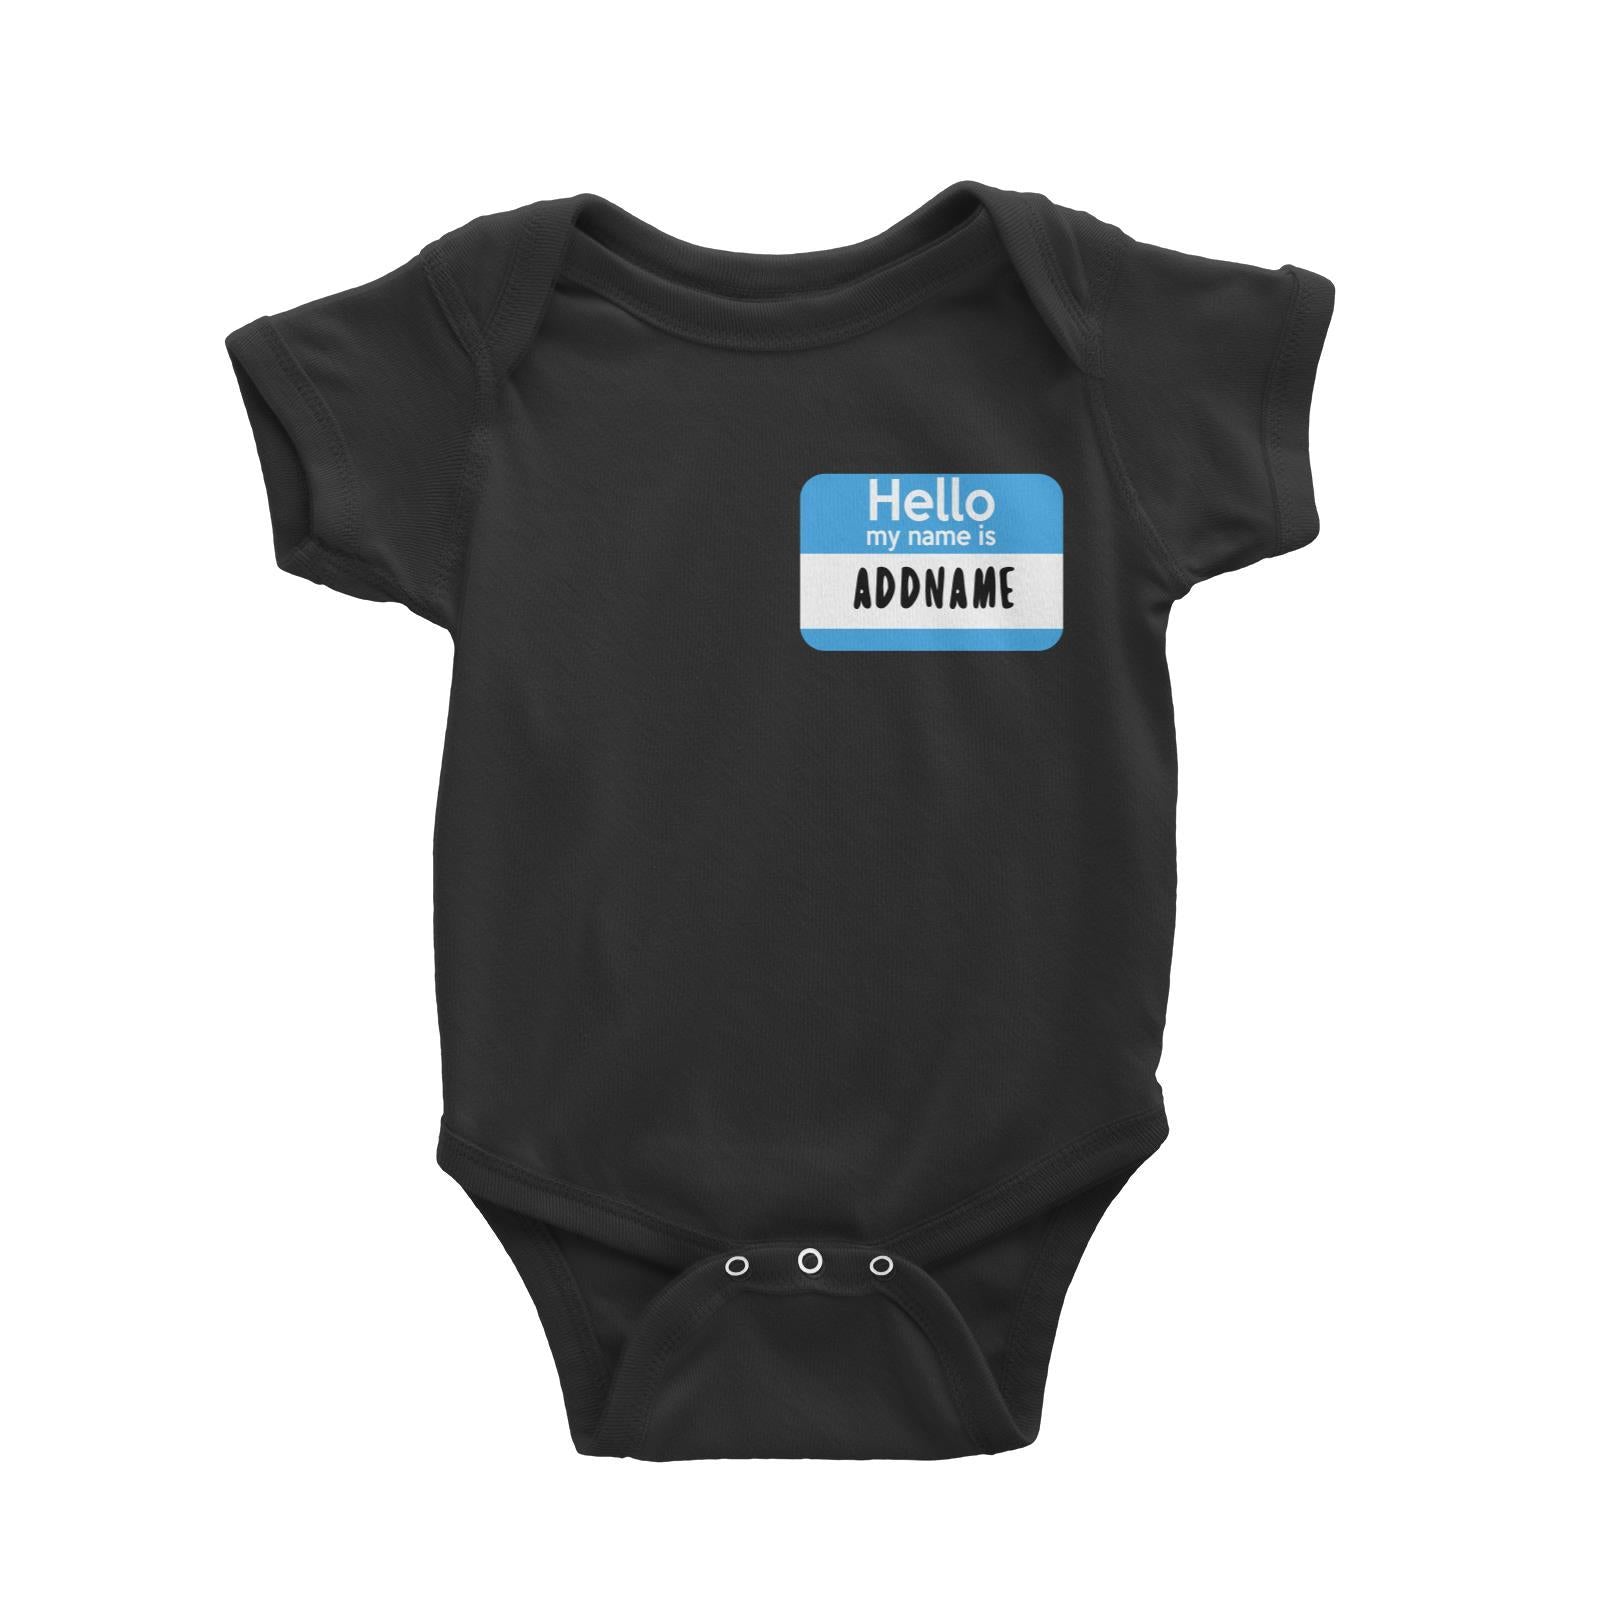 Hello My Name is Addname in Blue Tag Baby Romper Personalizable Designs Basic Newborn